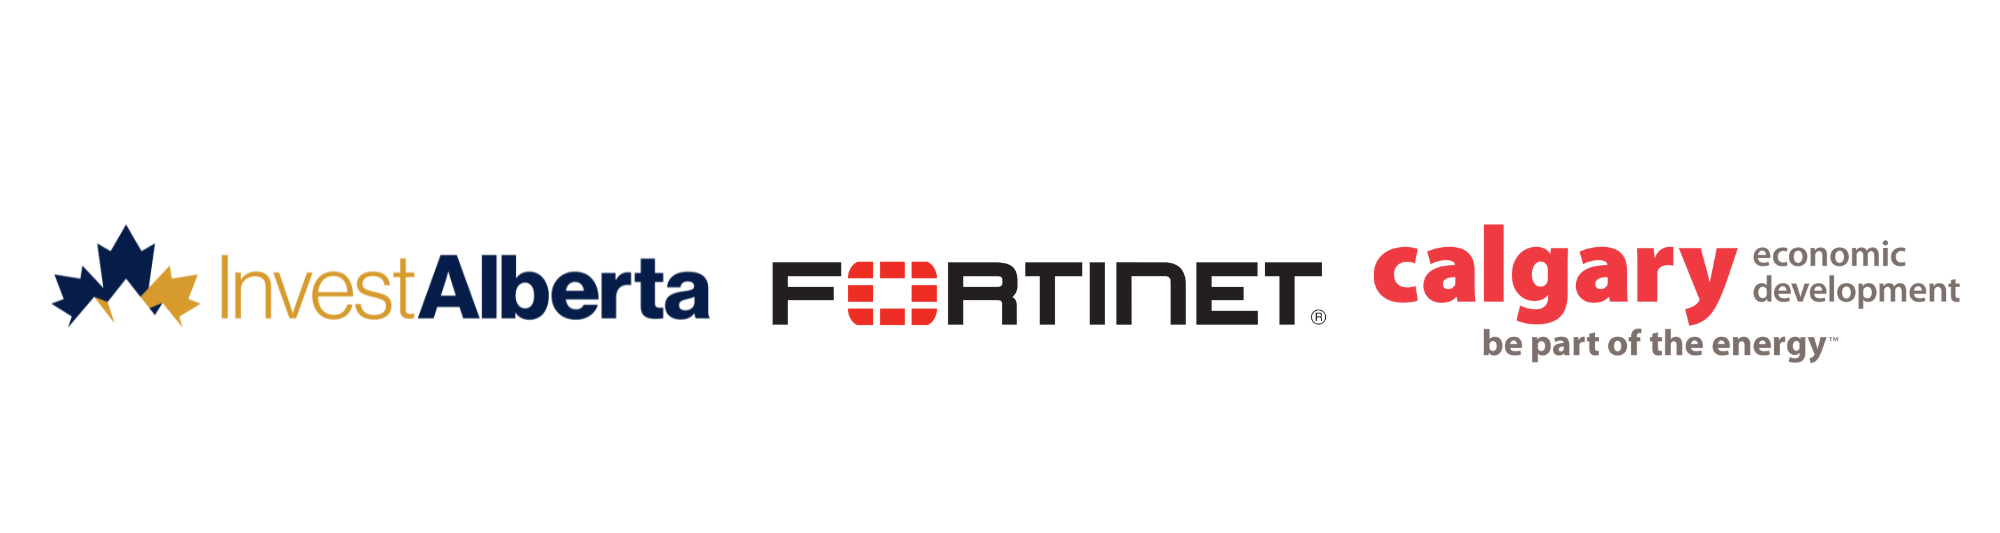 Fortinet invests $30